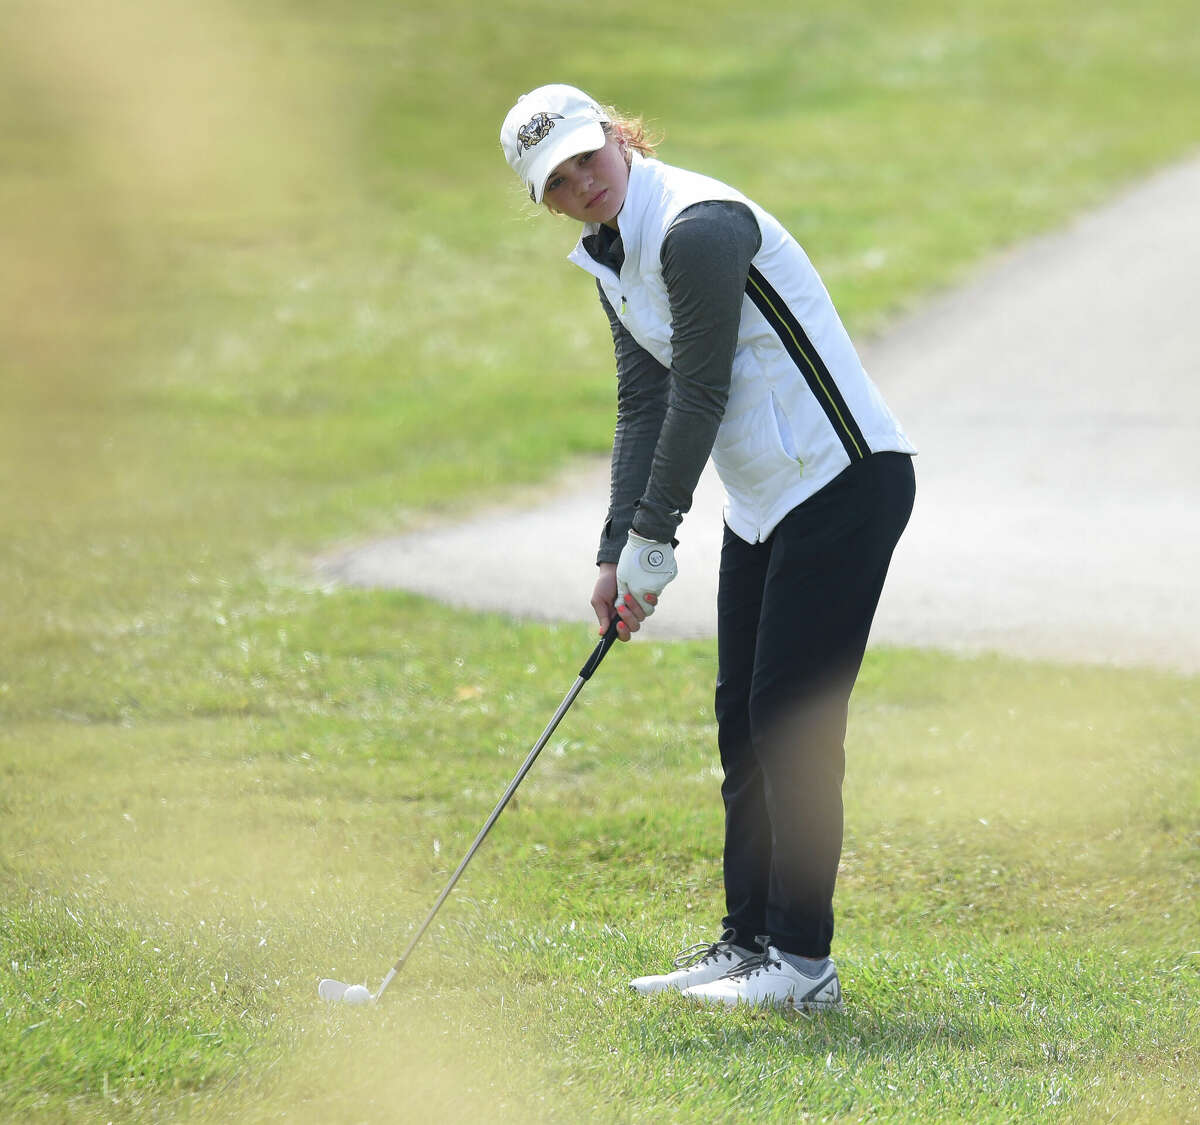 Father McGivney's Sarah Hyten hits hole-in-one at state tournament